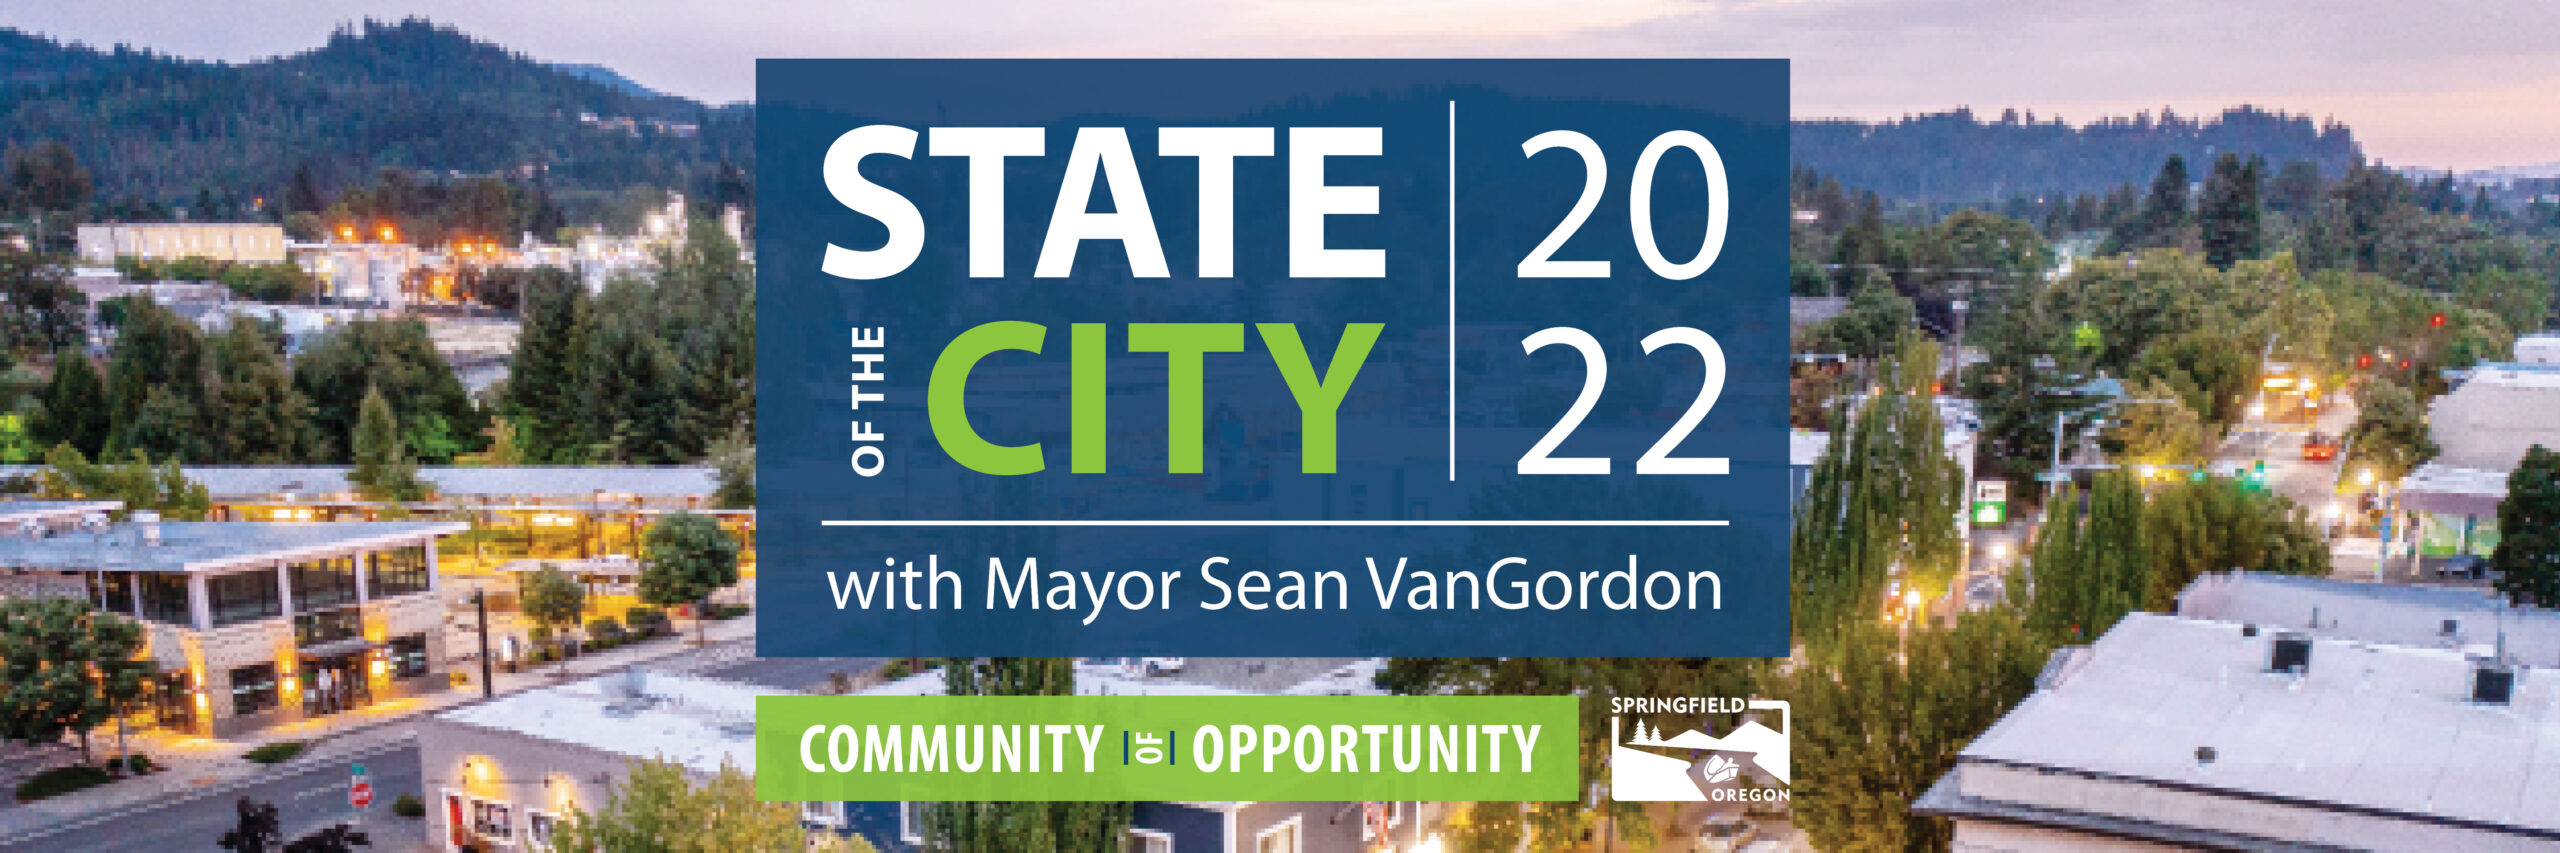 2022 State of the City Banner